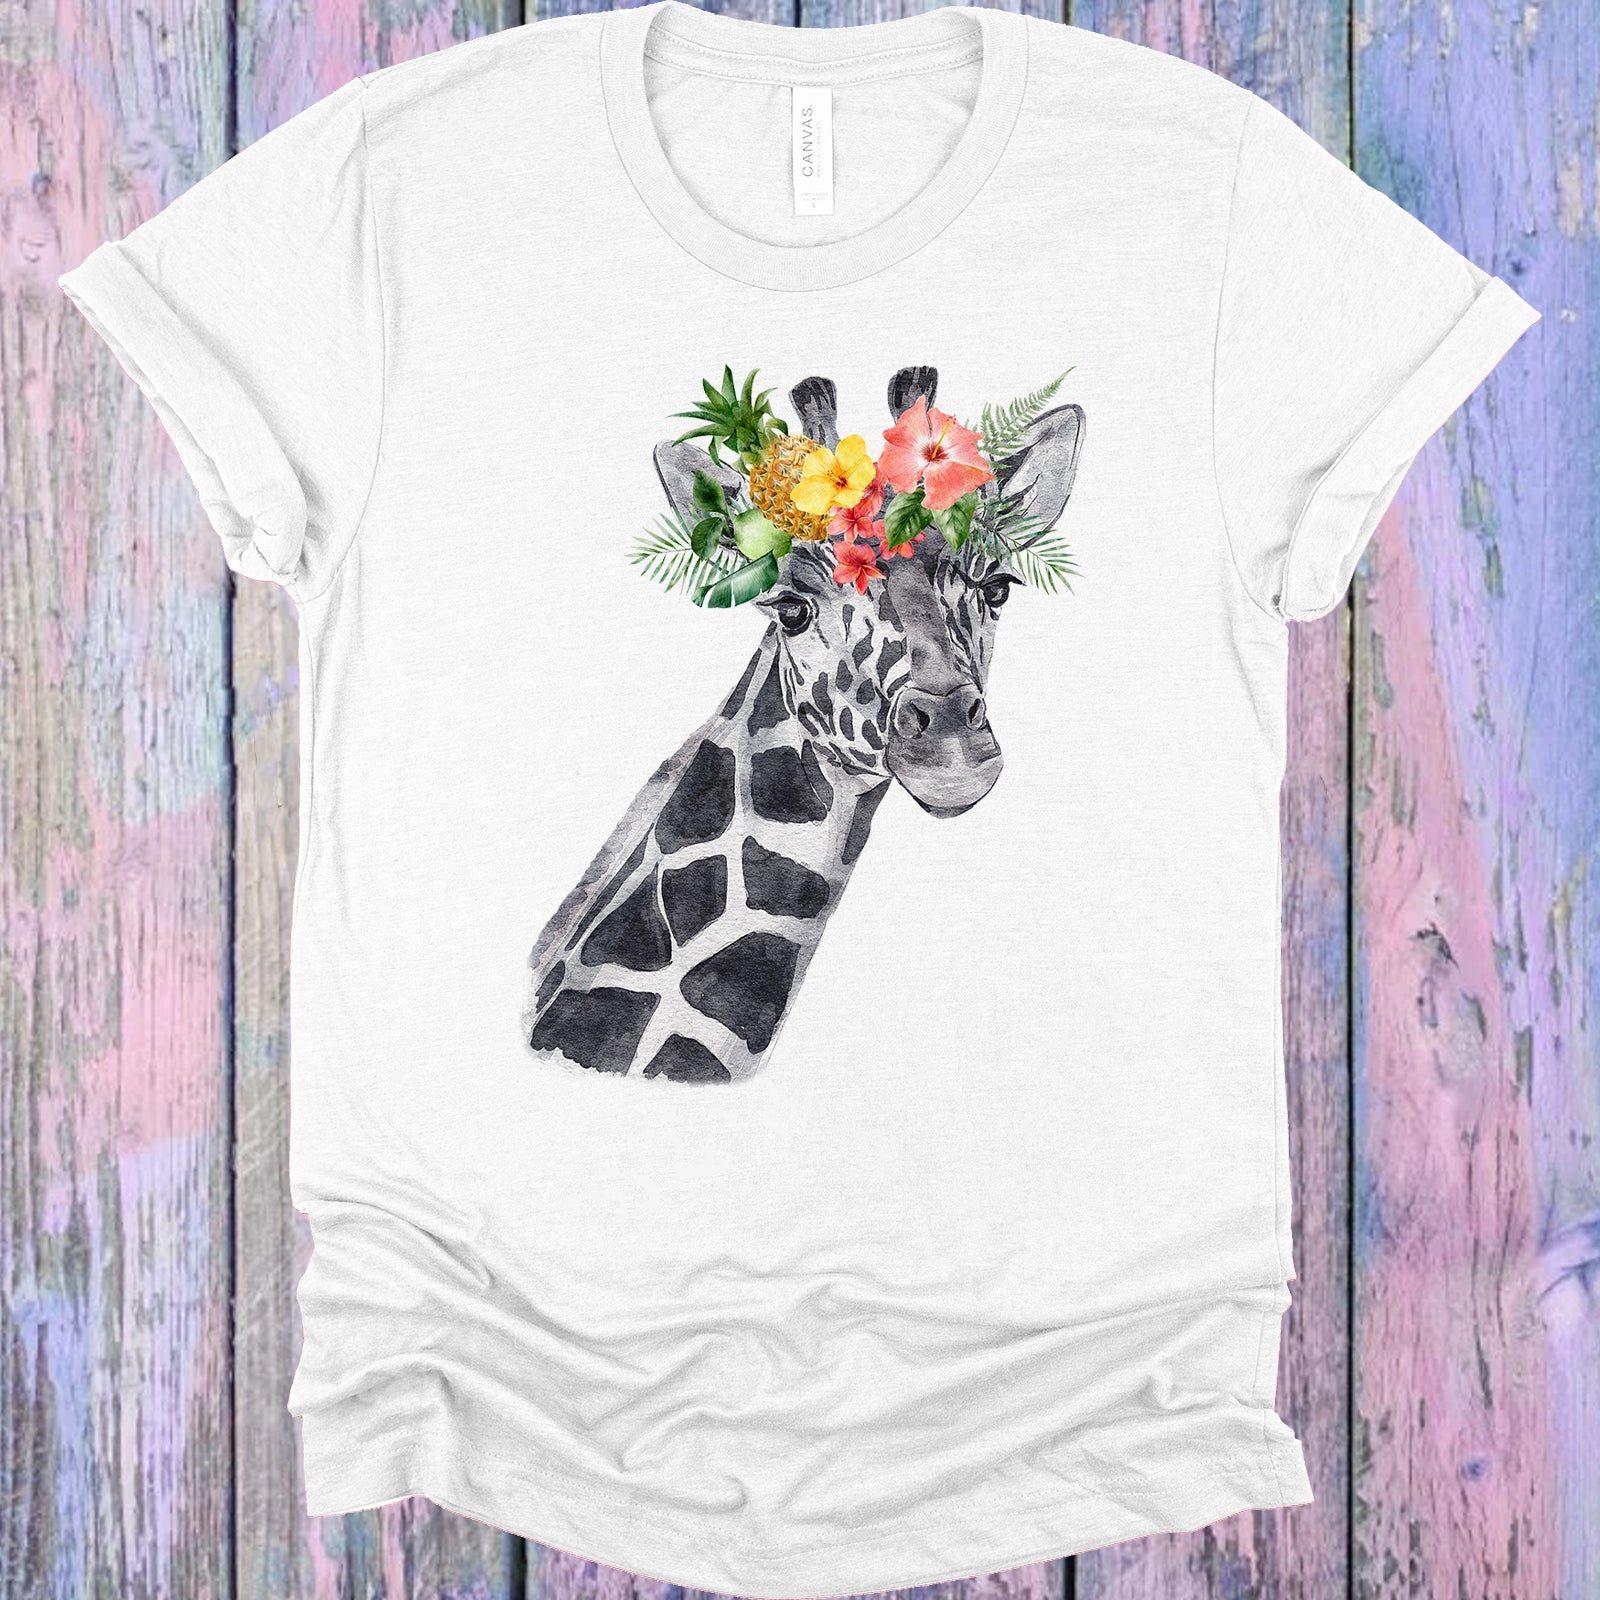 Floral Giraffe Graphic Tee Graphic Tee